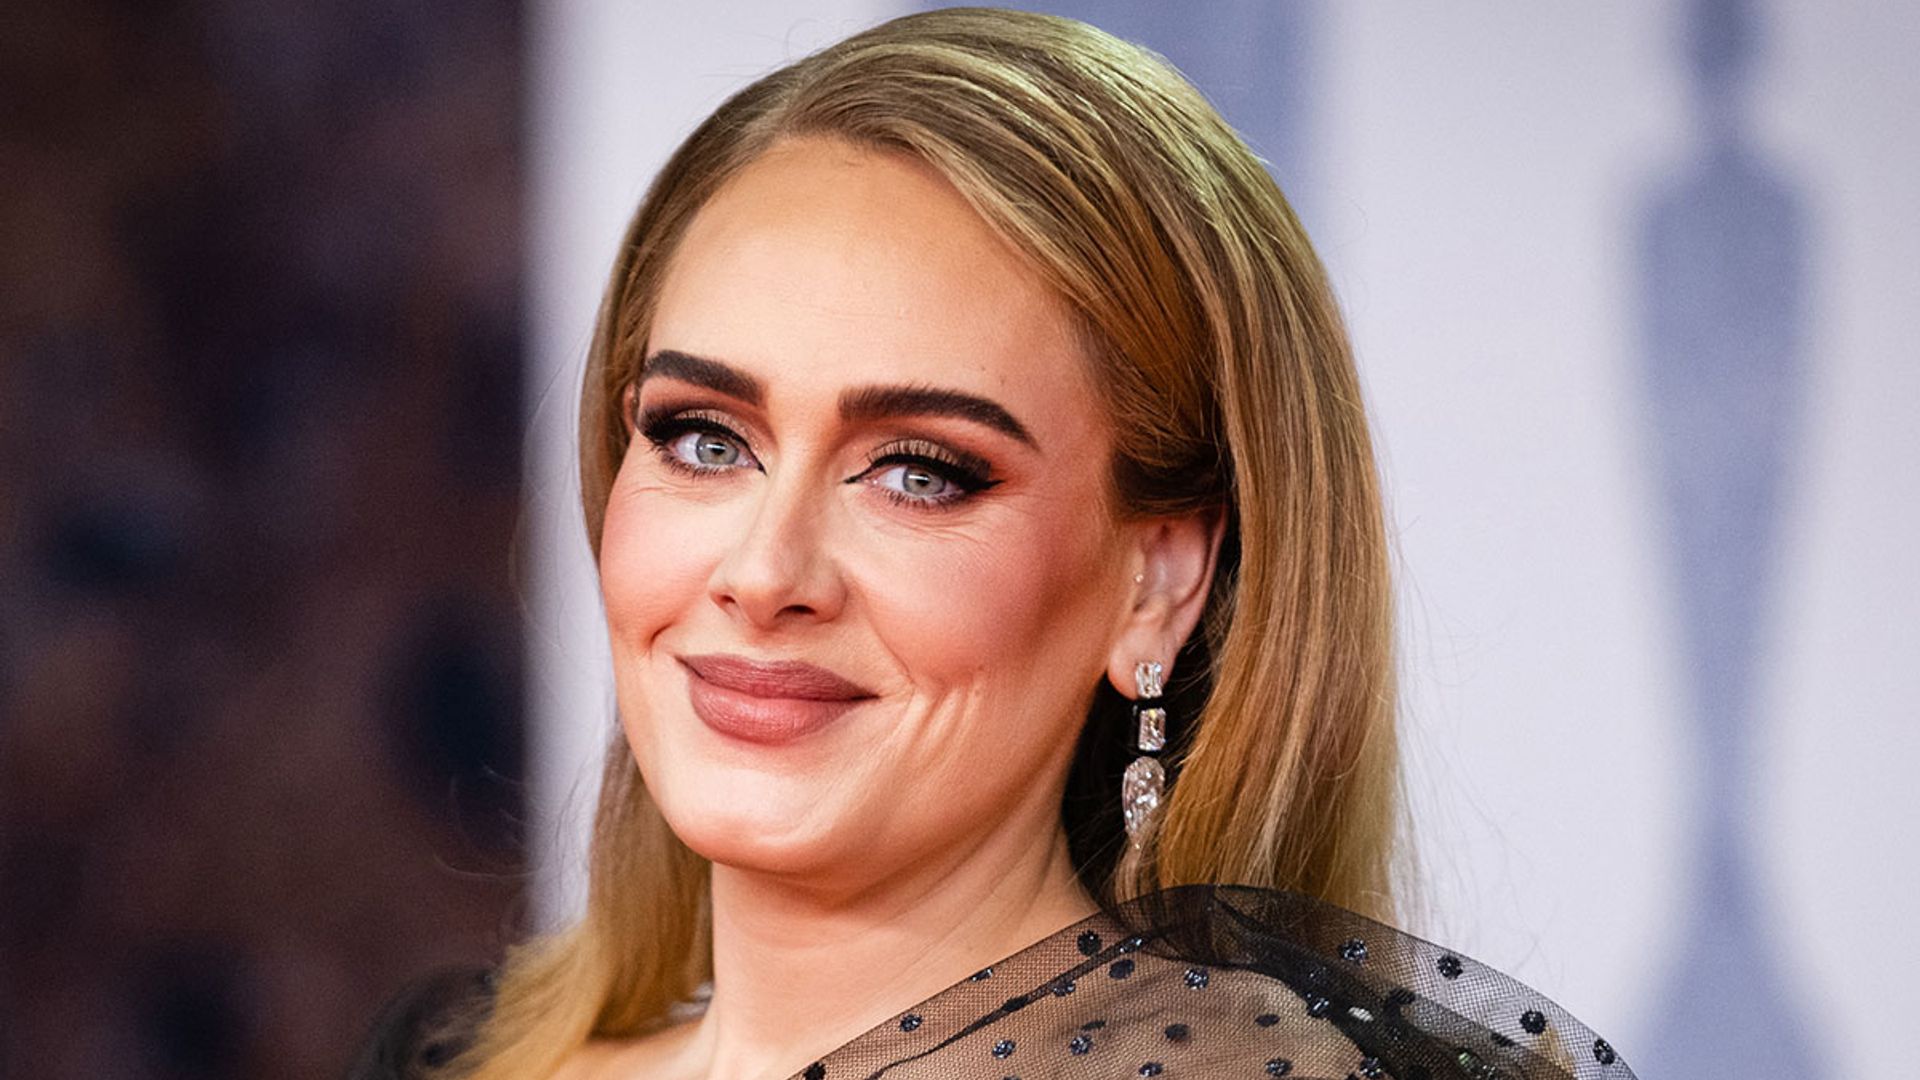 Adele stuns in black mini dress as she marks 34th birthday with makeup free photos